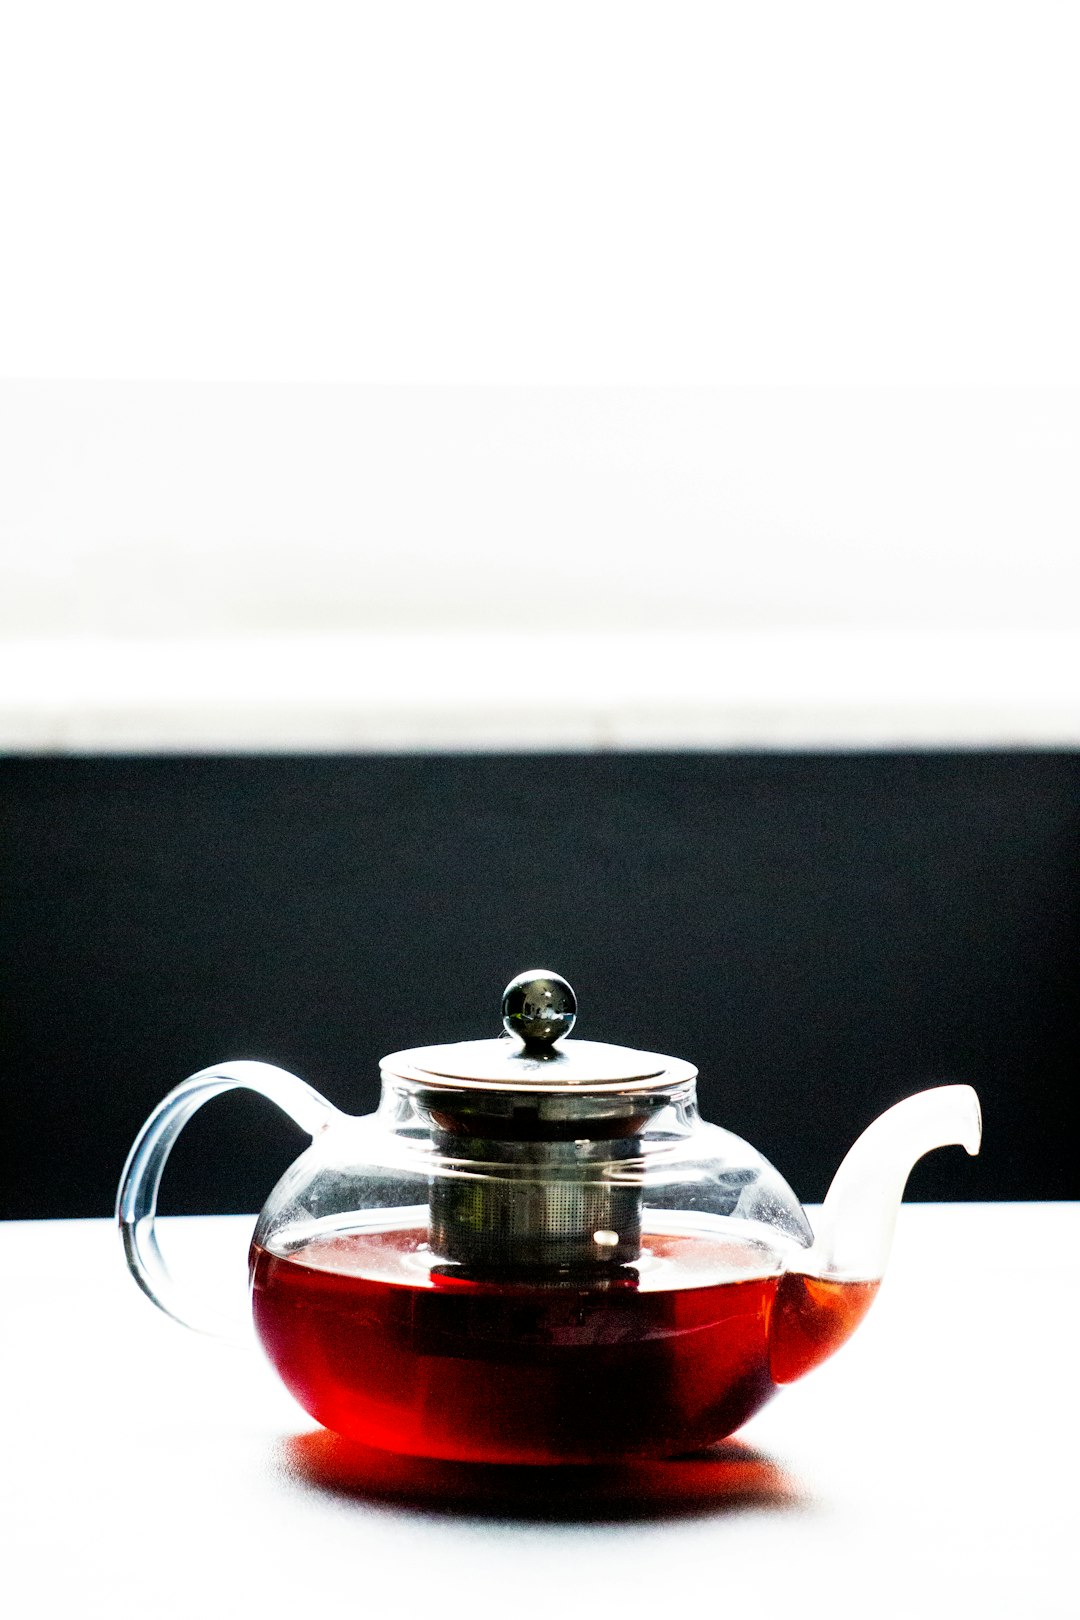 red and silver teapot on black table